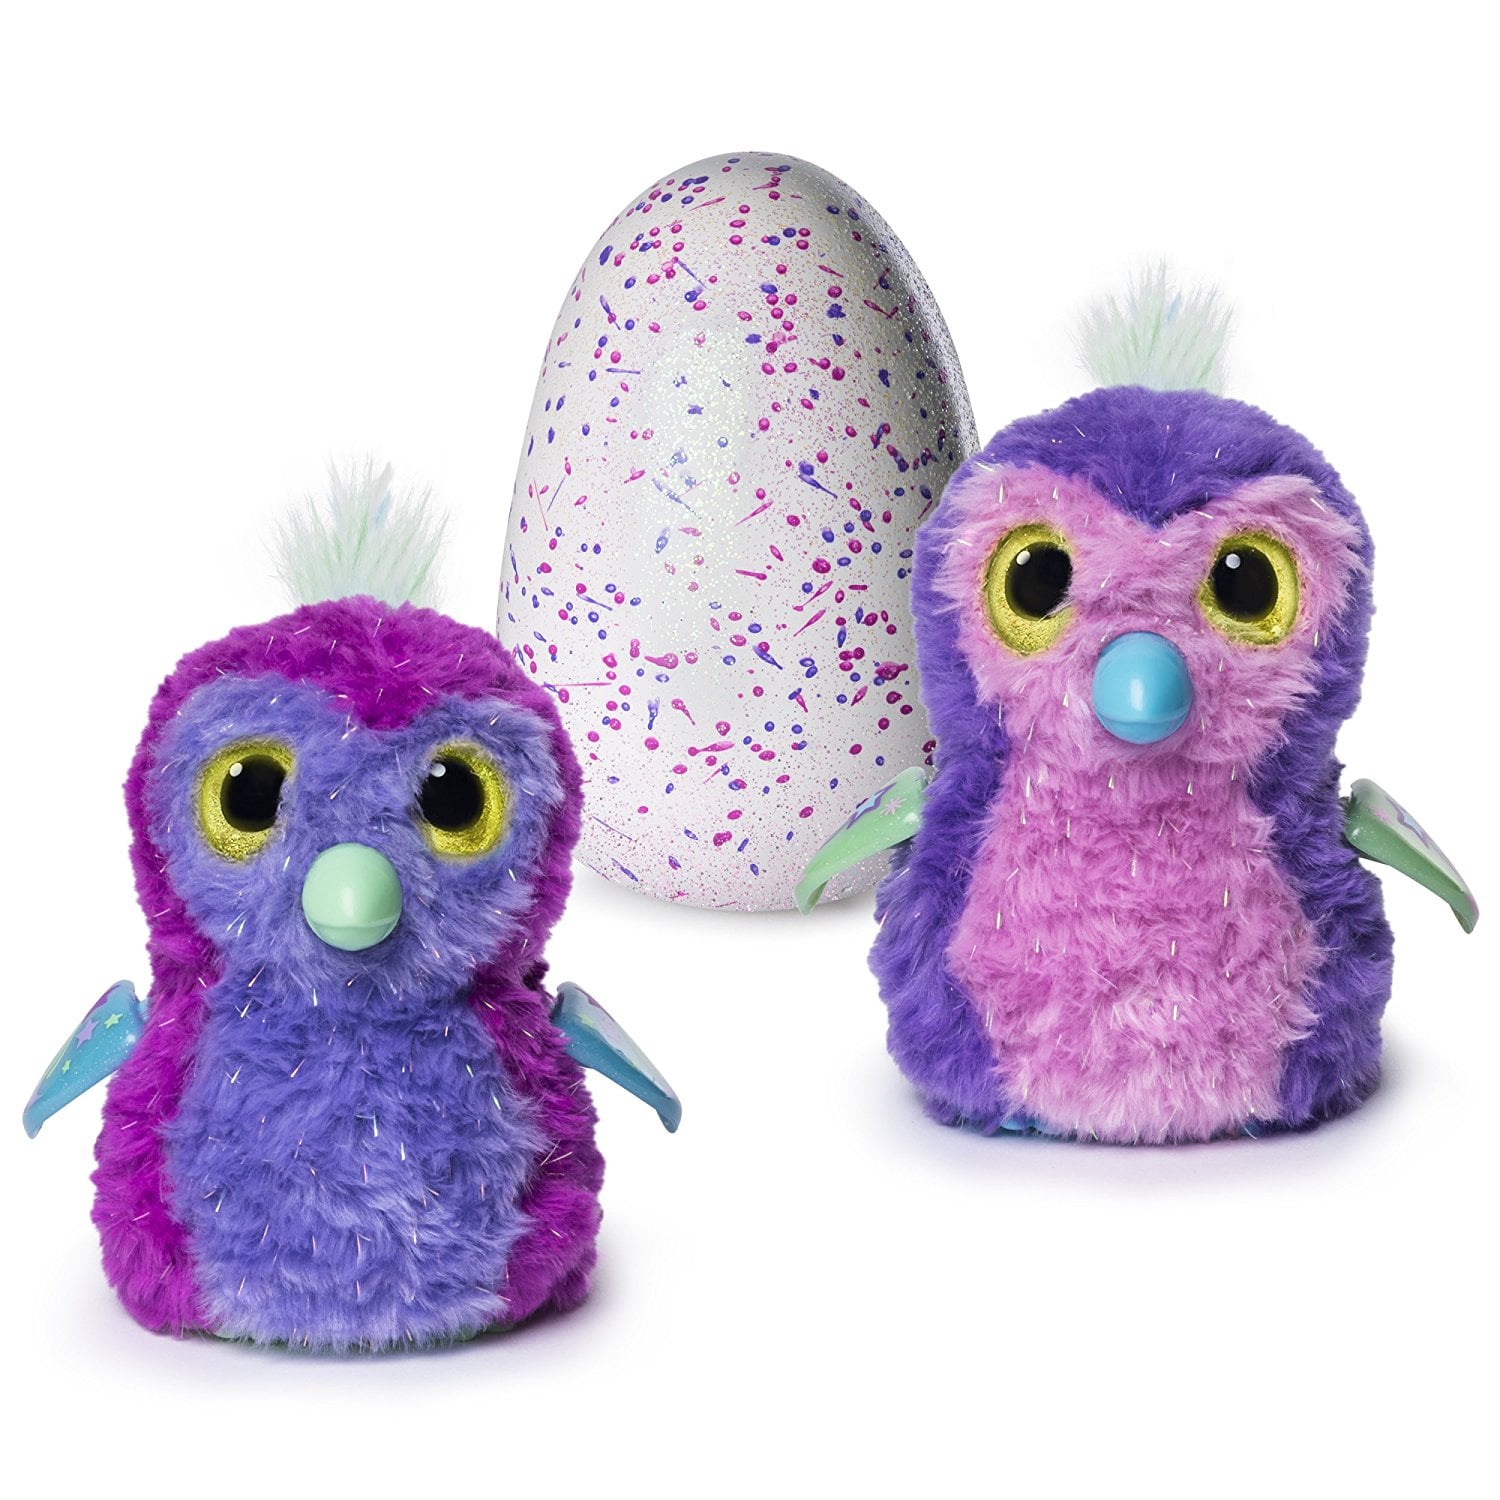 2017 HATCHIMALS SURPRISE TWIN PUPPADEE TOYS R US Exclusive RARE COLLECTIBLE